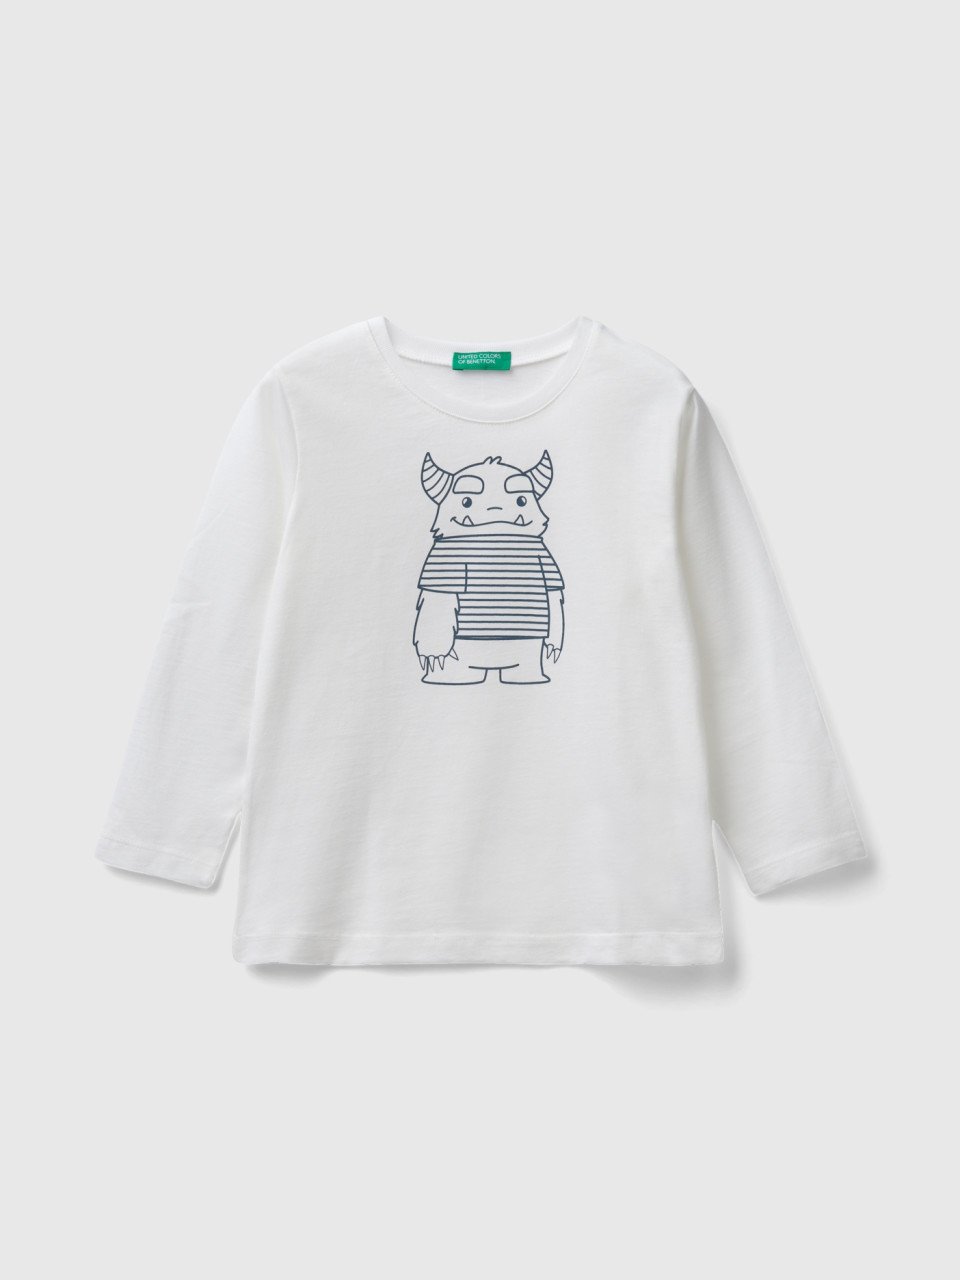 Benetton, Sweater In Cotton With Print, Creamy White, Kids